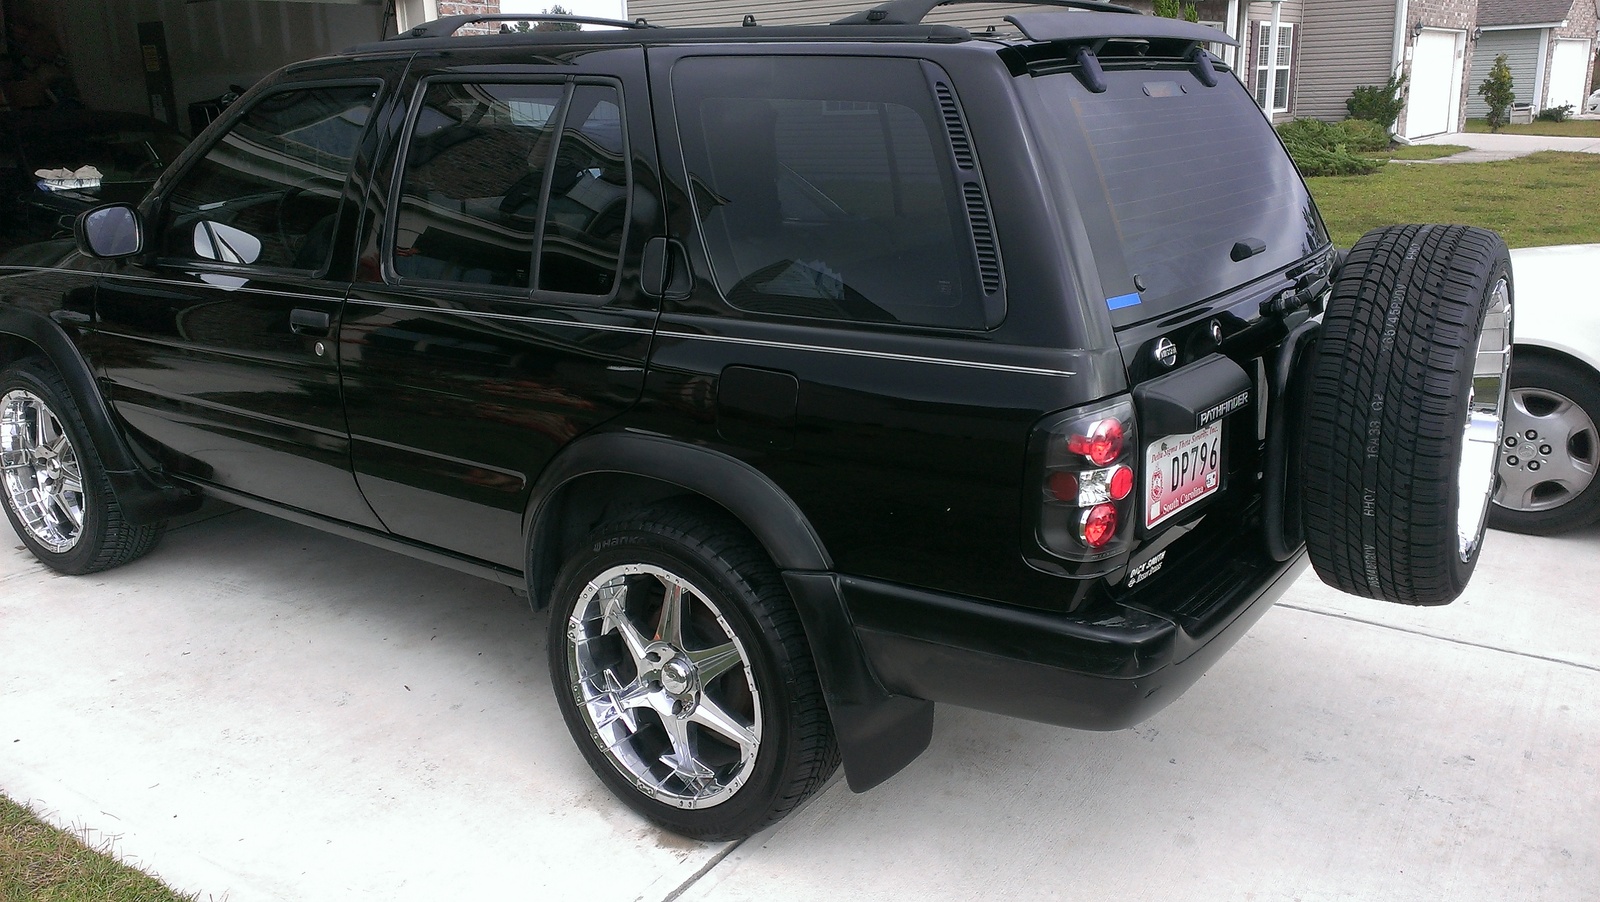 Used nissan pathfinders for sale in sc #4